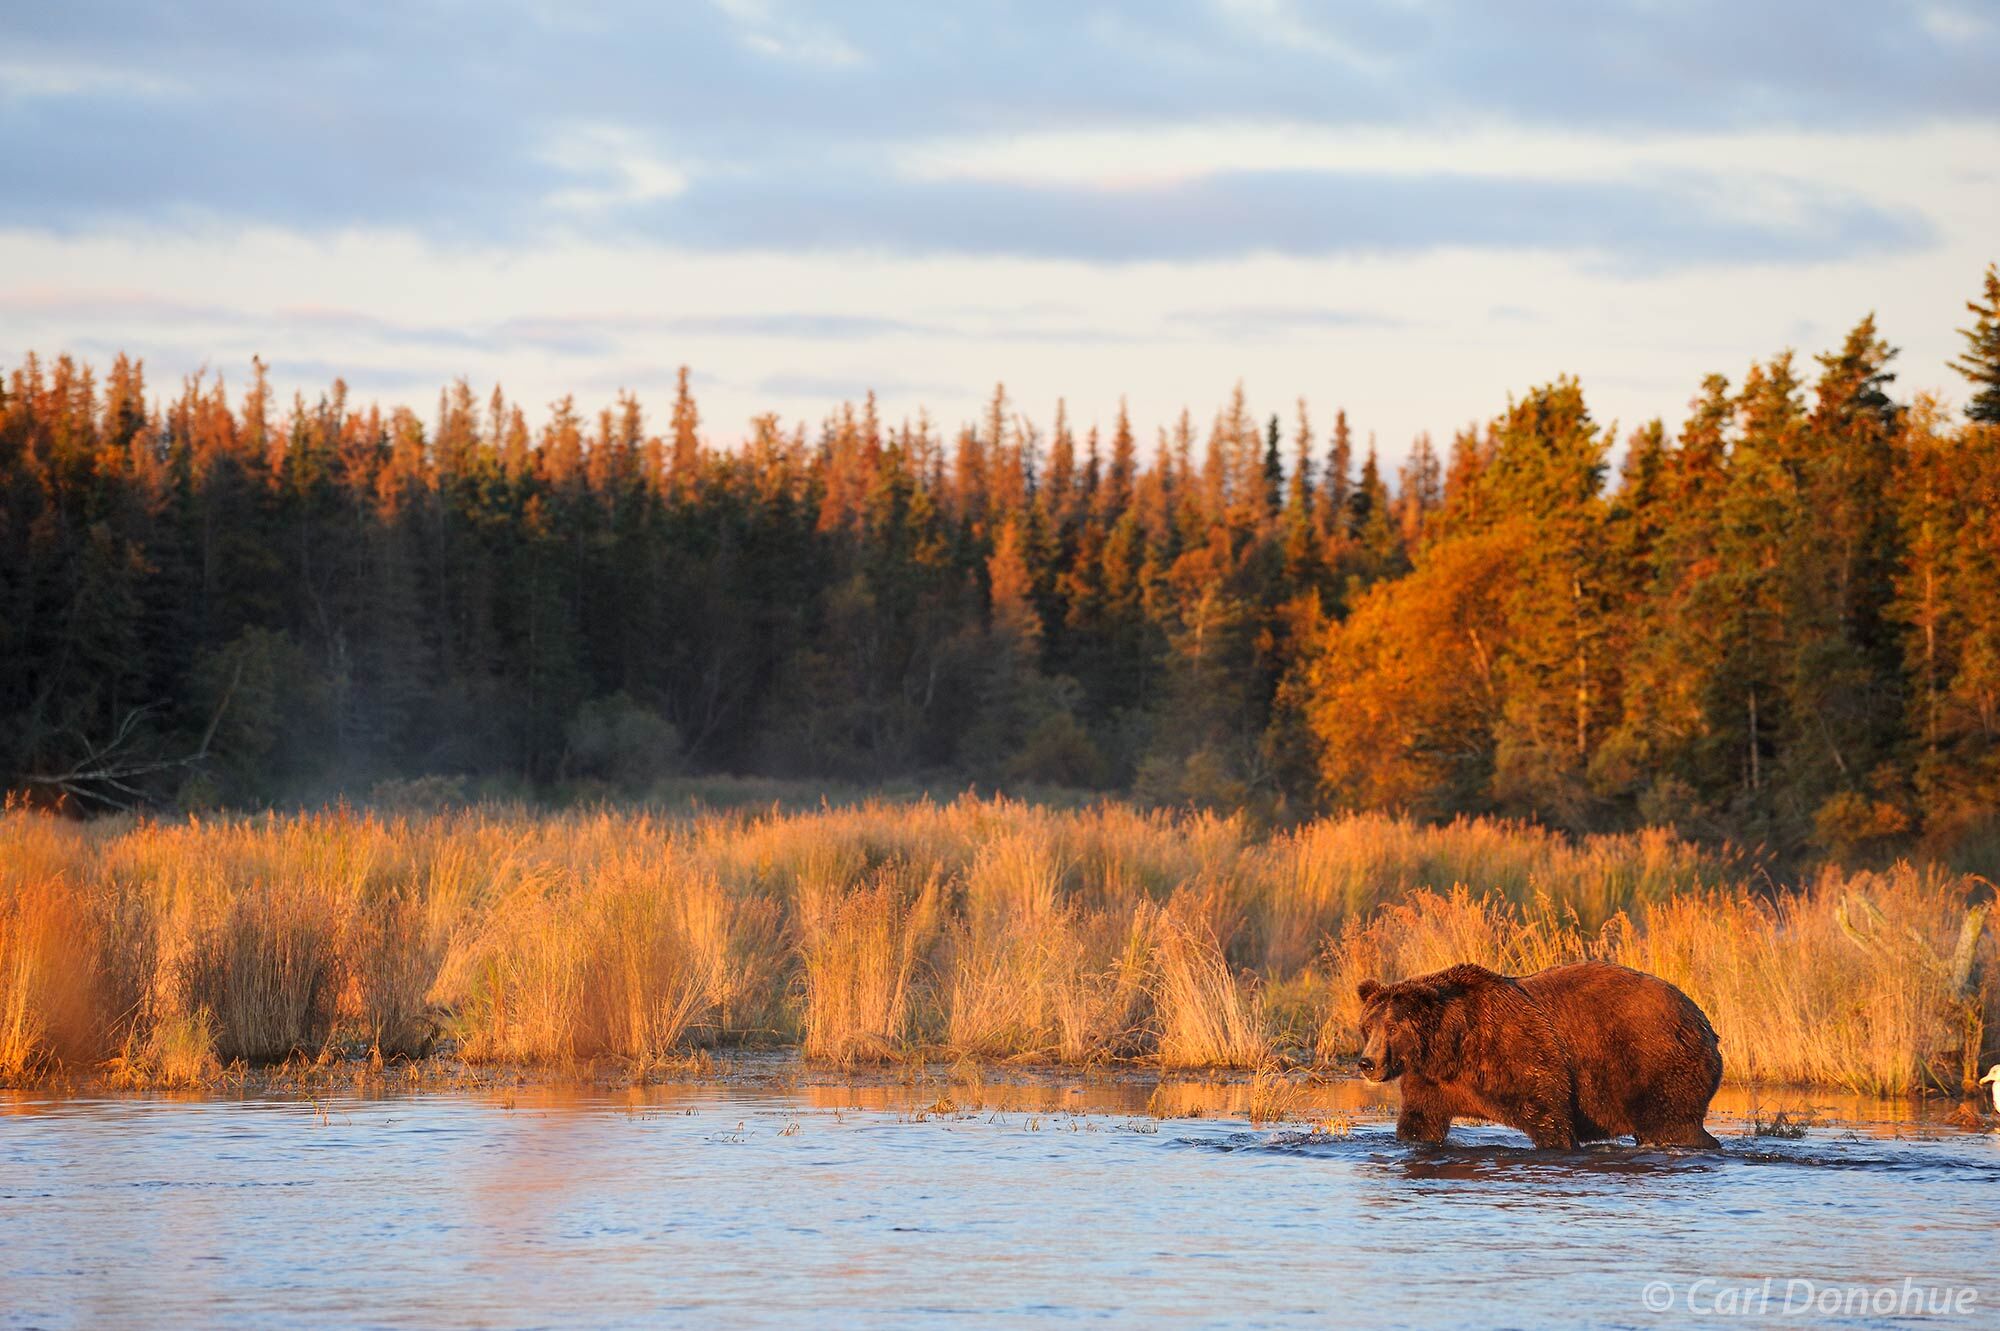 A brown bear patrols the river's edge at dawn, searching for spawning Sockeye salmon. Brown bear (Ursus arctos), Brooks River...